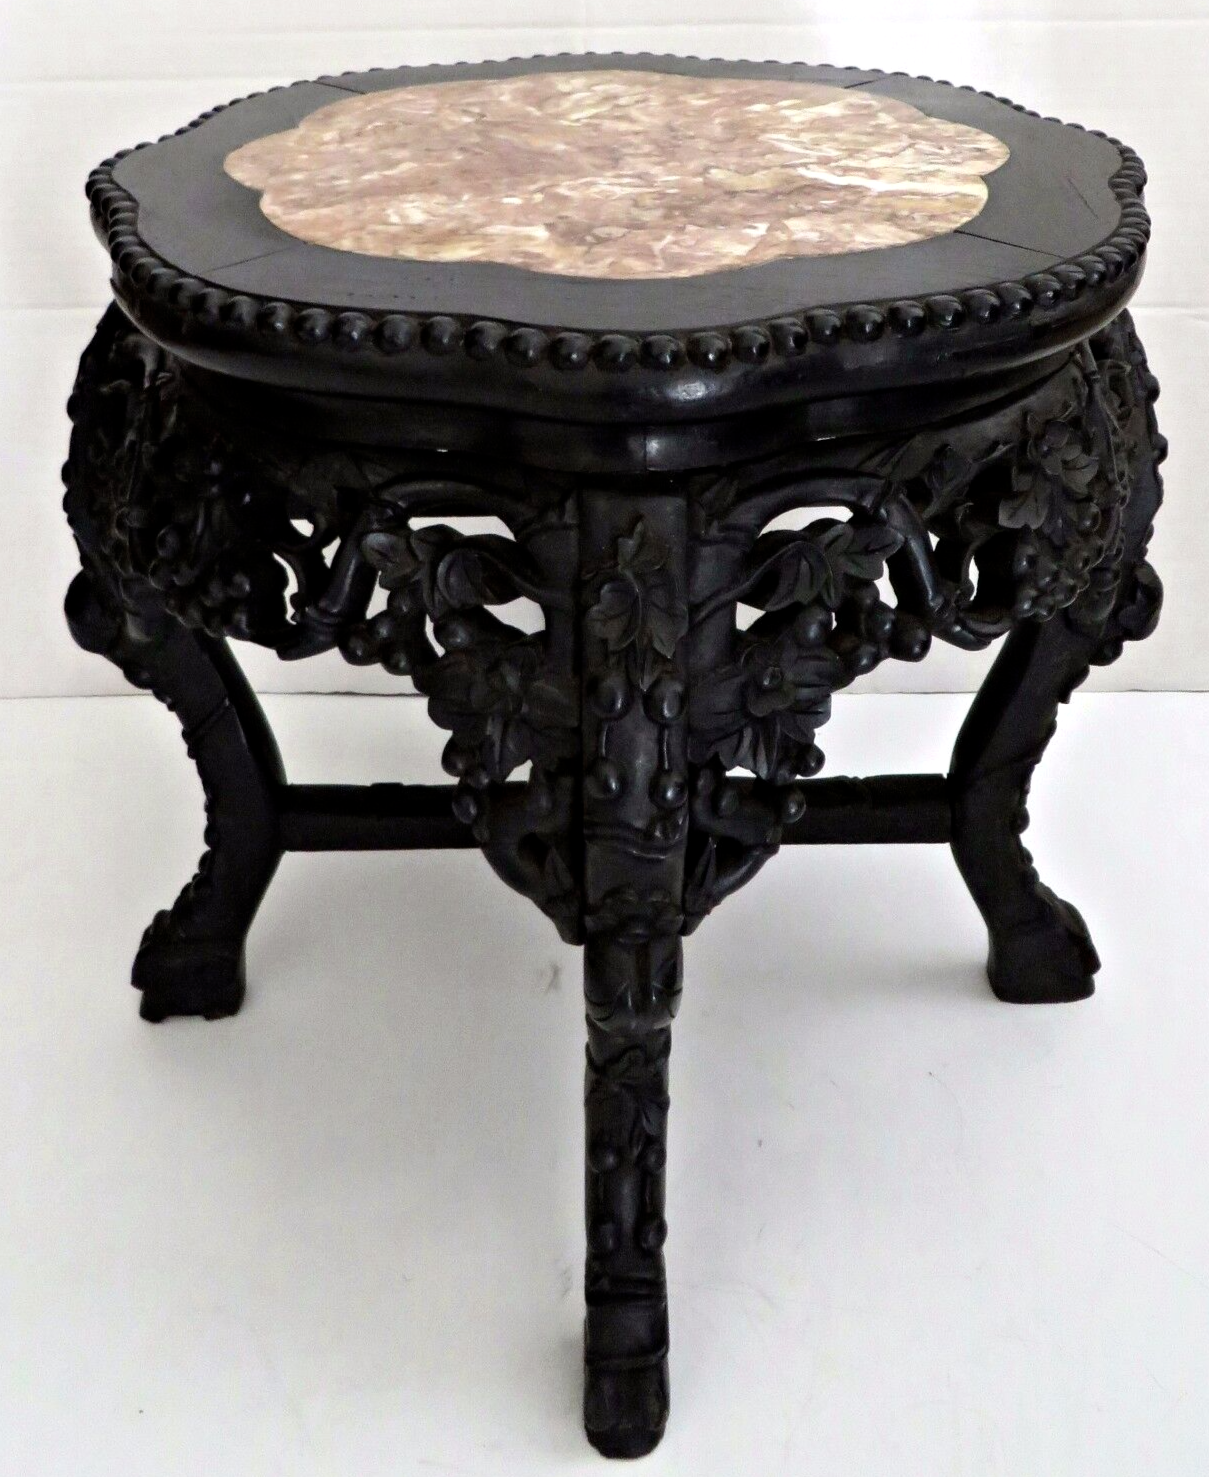 Antique 1870's Oriental Chinese Carved Wood Marble Top Side Table Plant Stand Без бренда - фотография #5